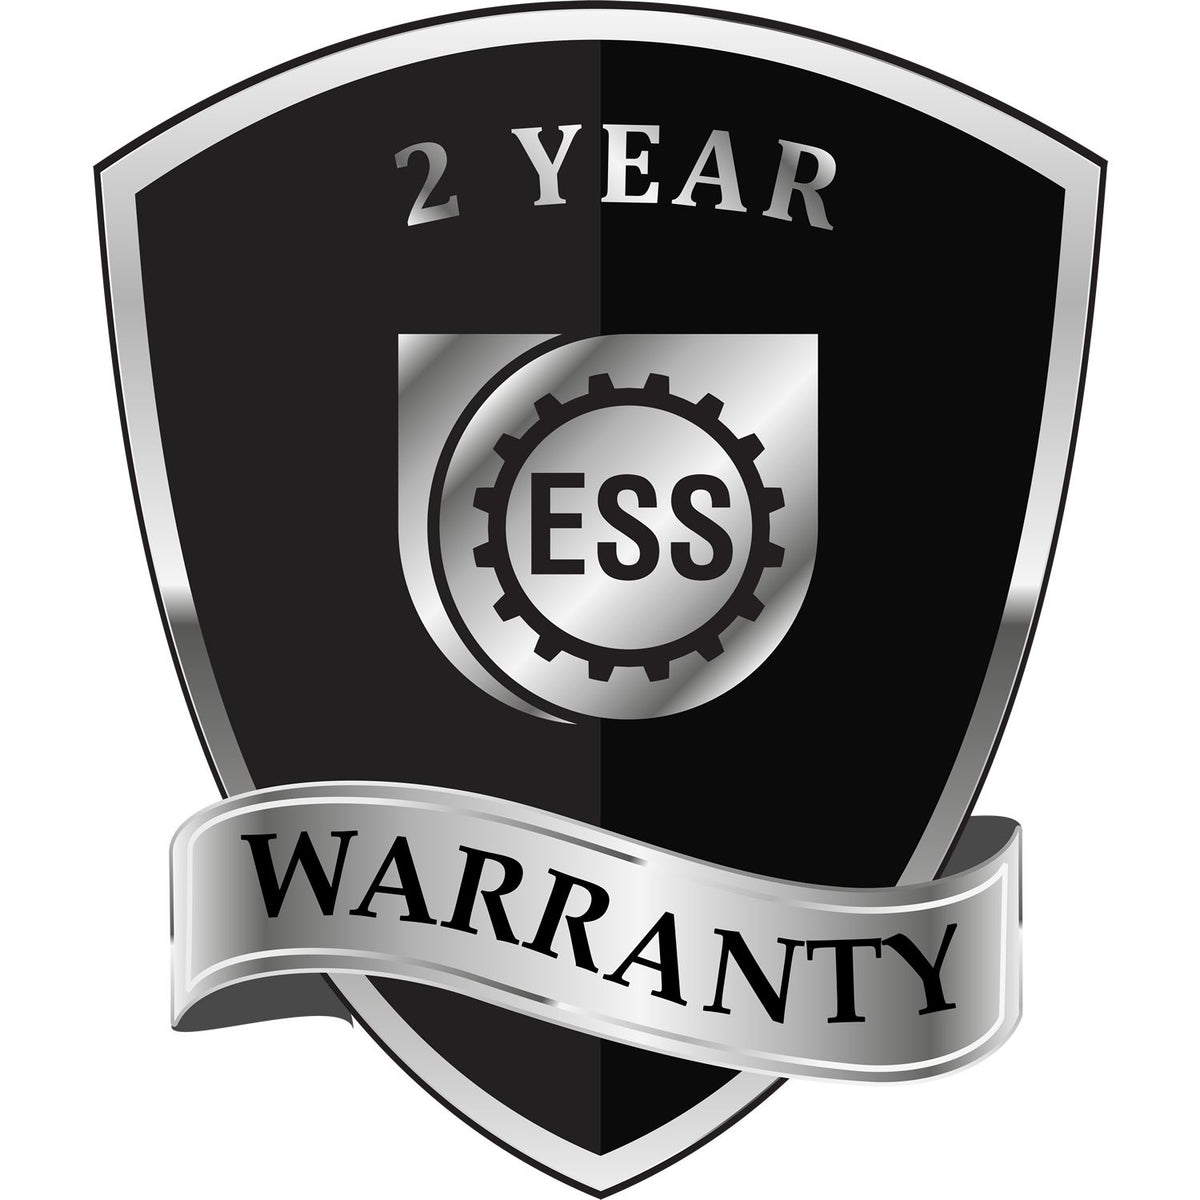 A black and silver badge or emblem showing warranty information for the Gift Illinois Architect Seal